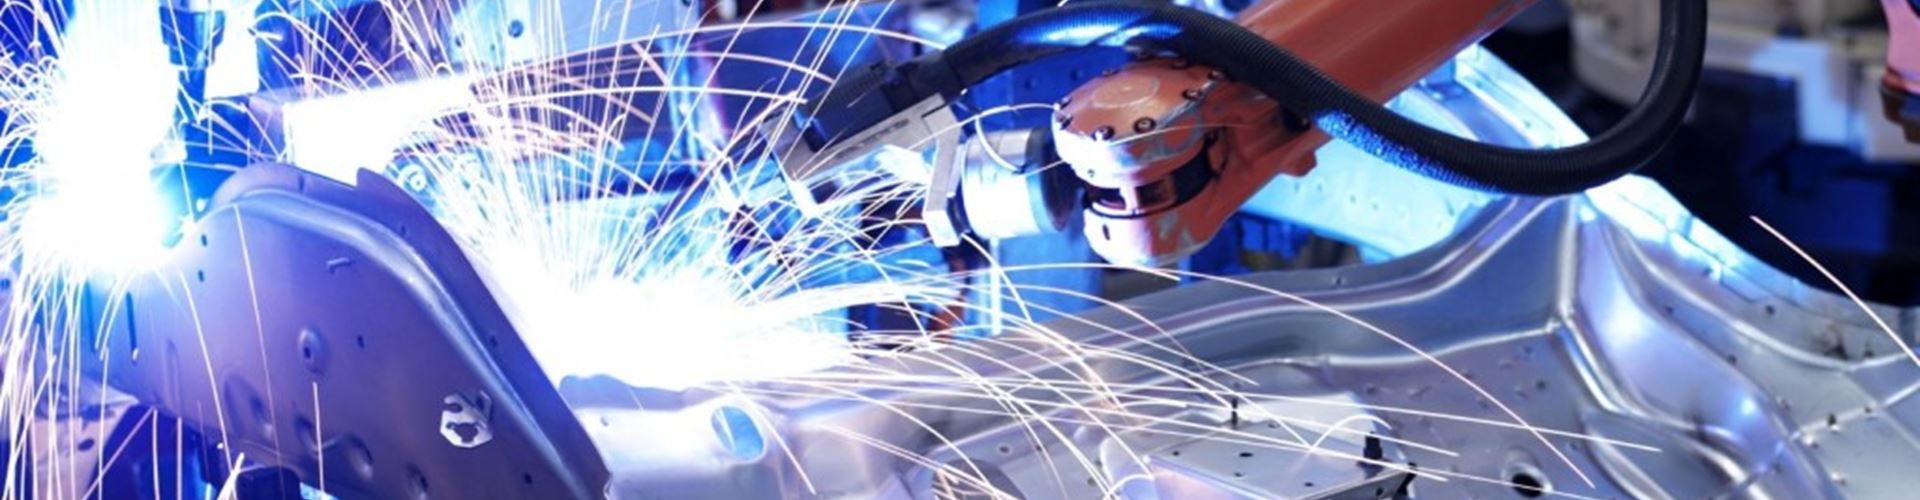 Manufacturing boosted by domestic demand despite weak exports